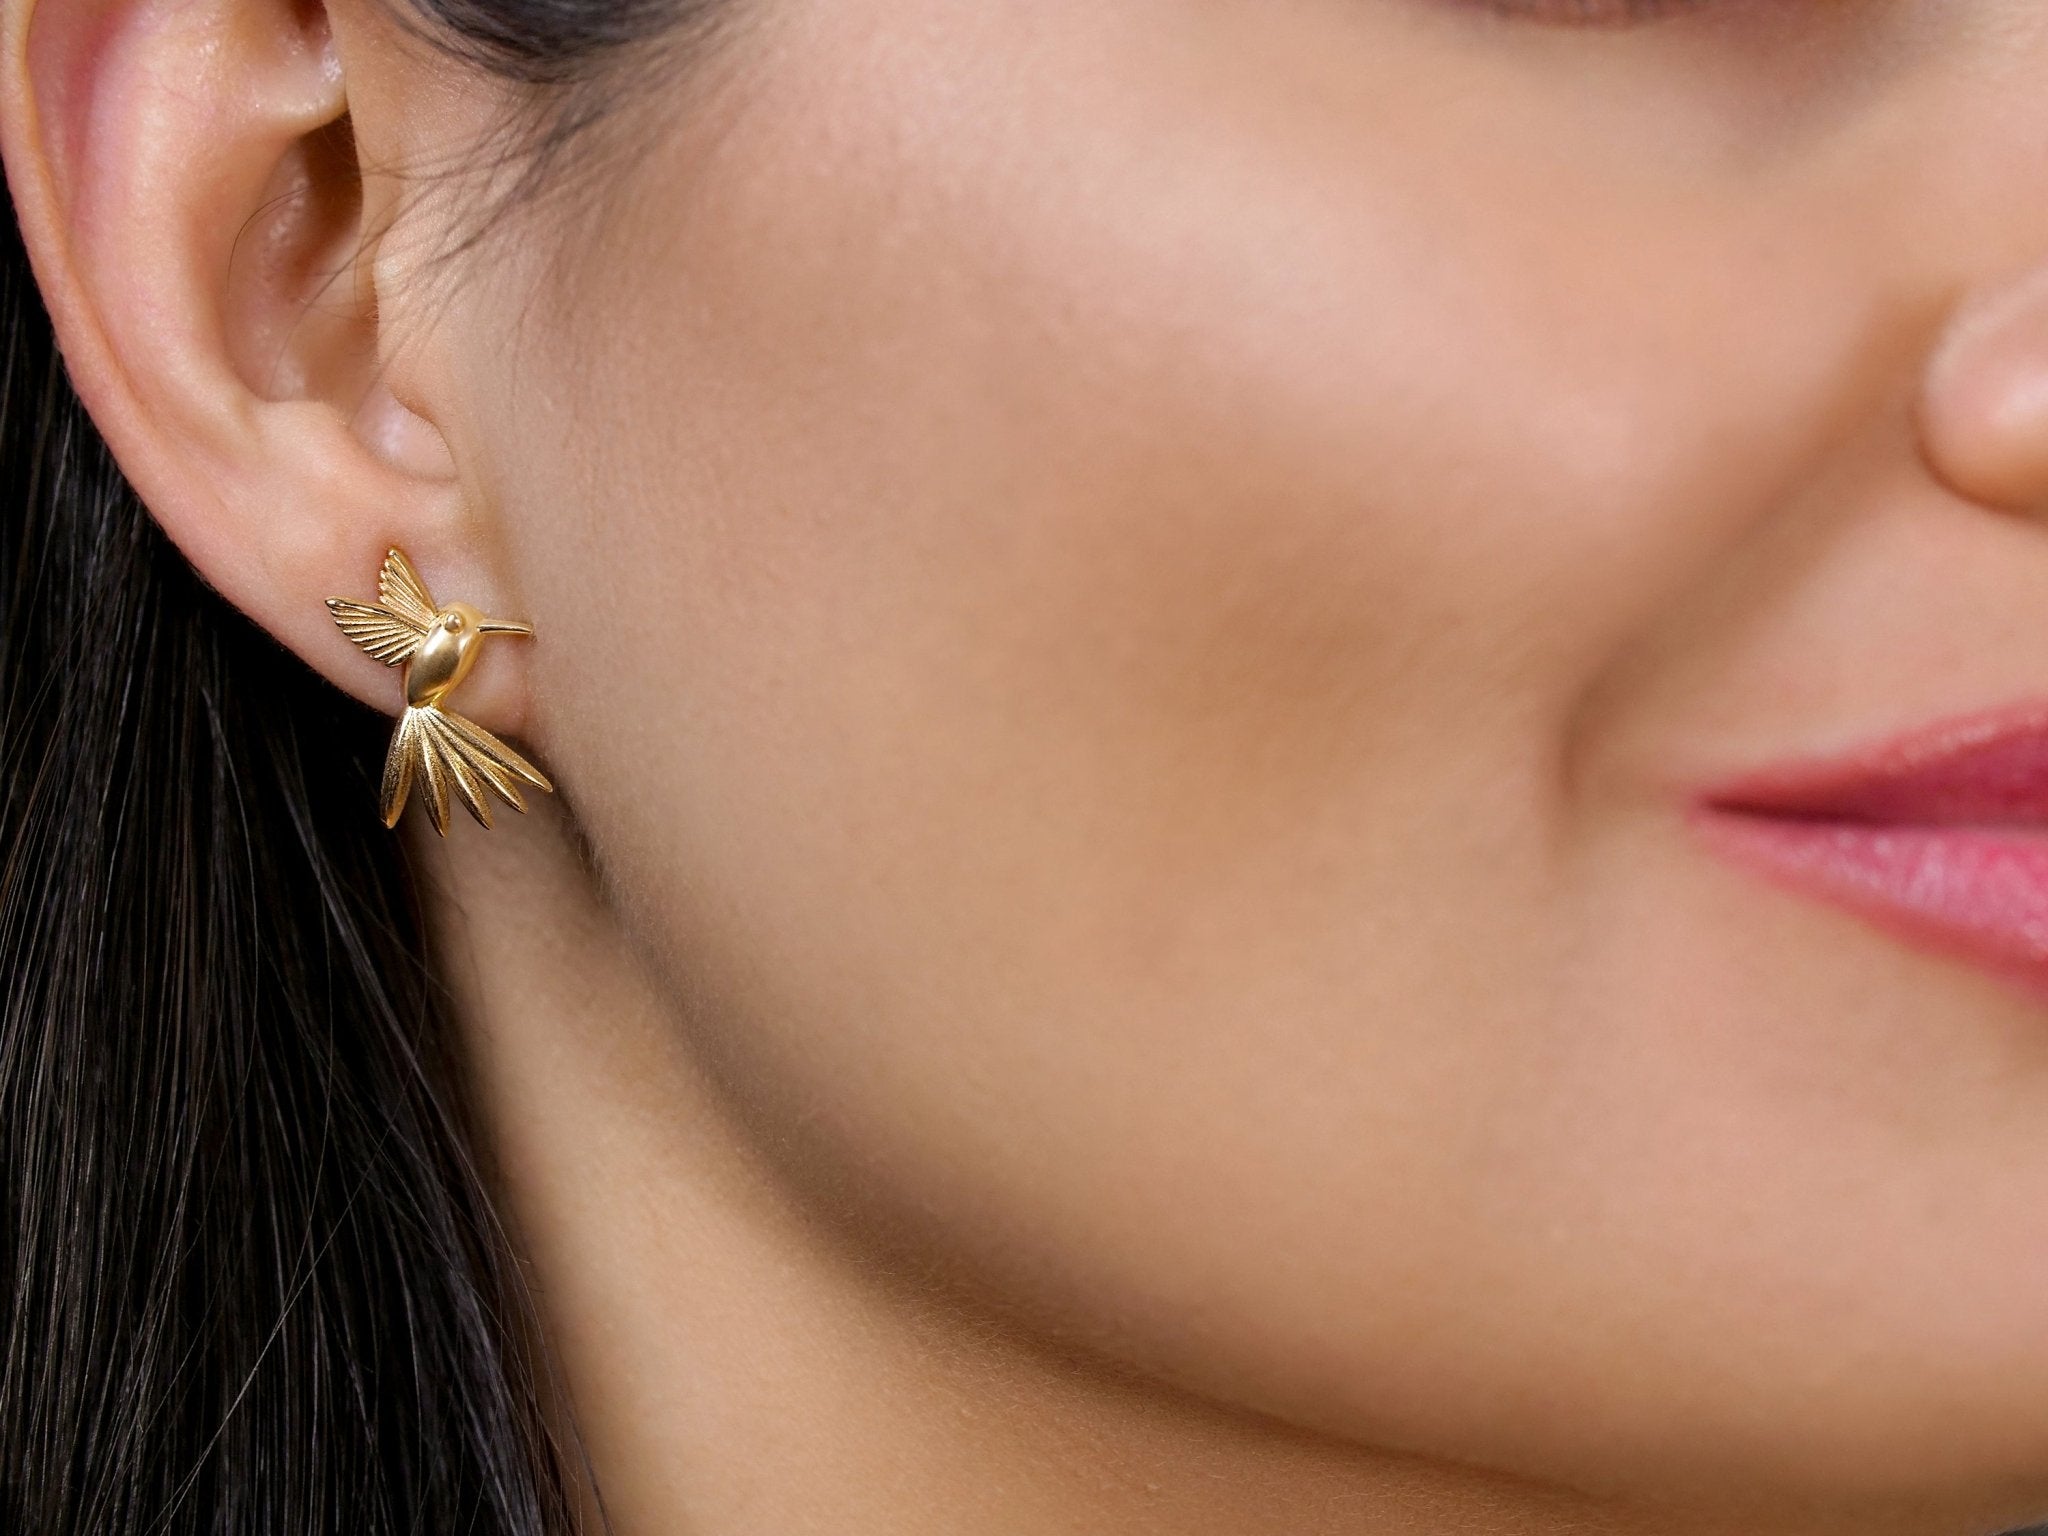 Golden Hummingbird Stud Earrings in Solid Gold – The “Humming Beauty” Set - Aurora Laffite Jewelry